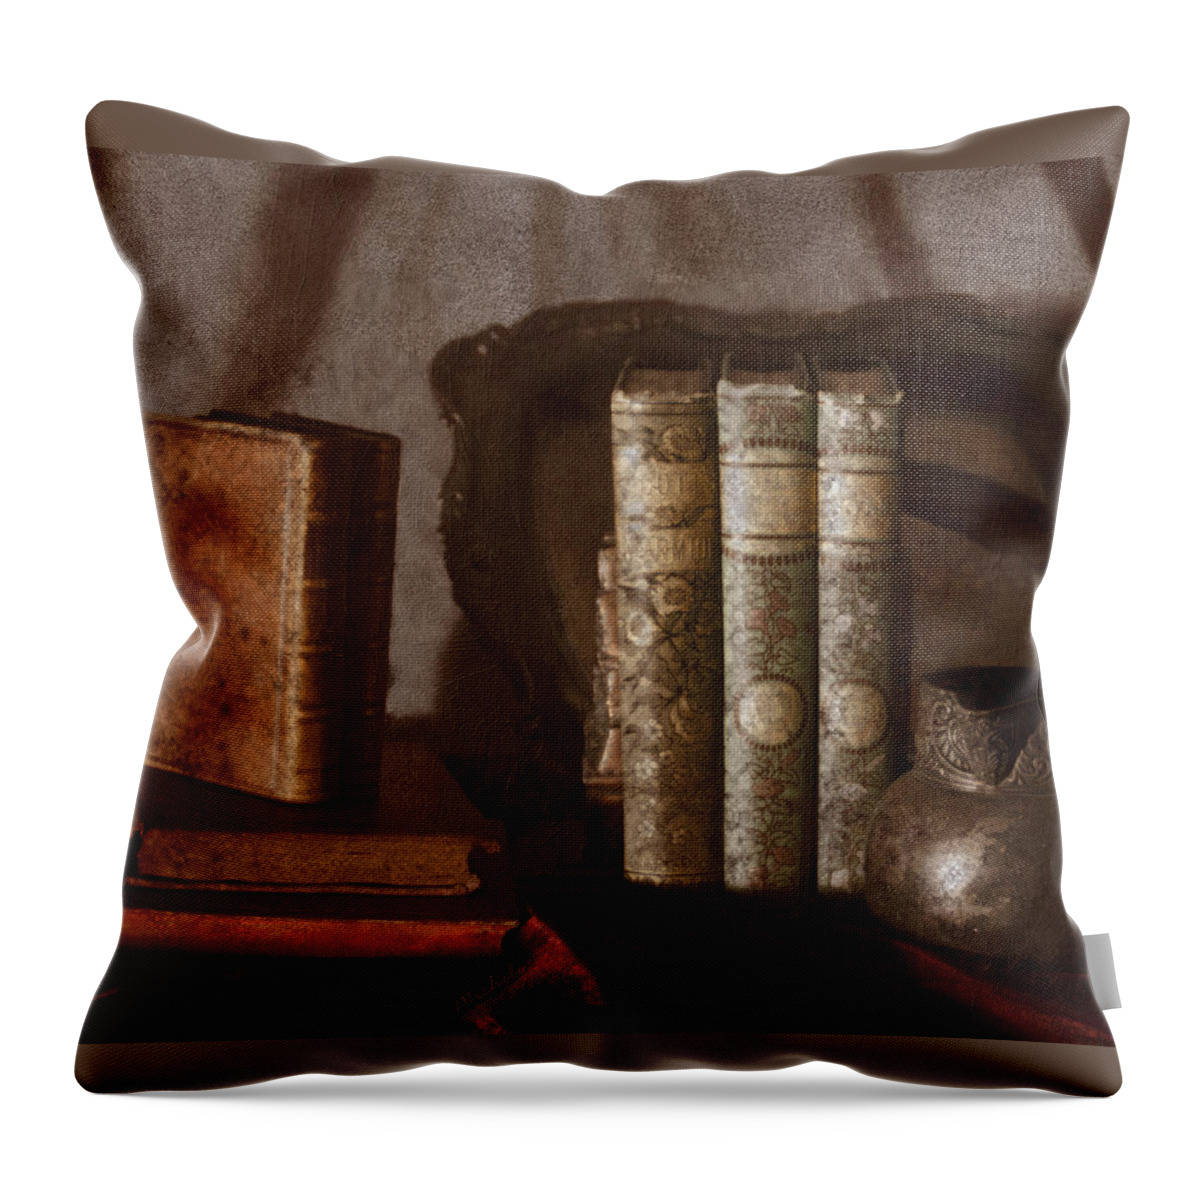 Still Life With Books Throw Pillow featuring the photograph Still Life with Books by Michele A Loftus